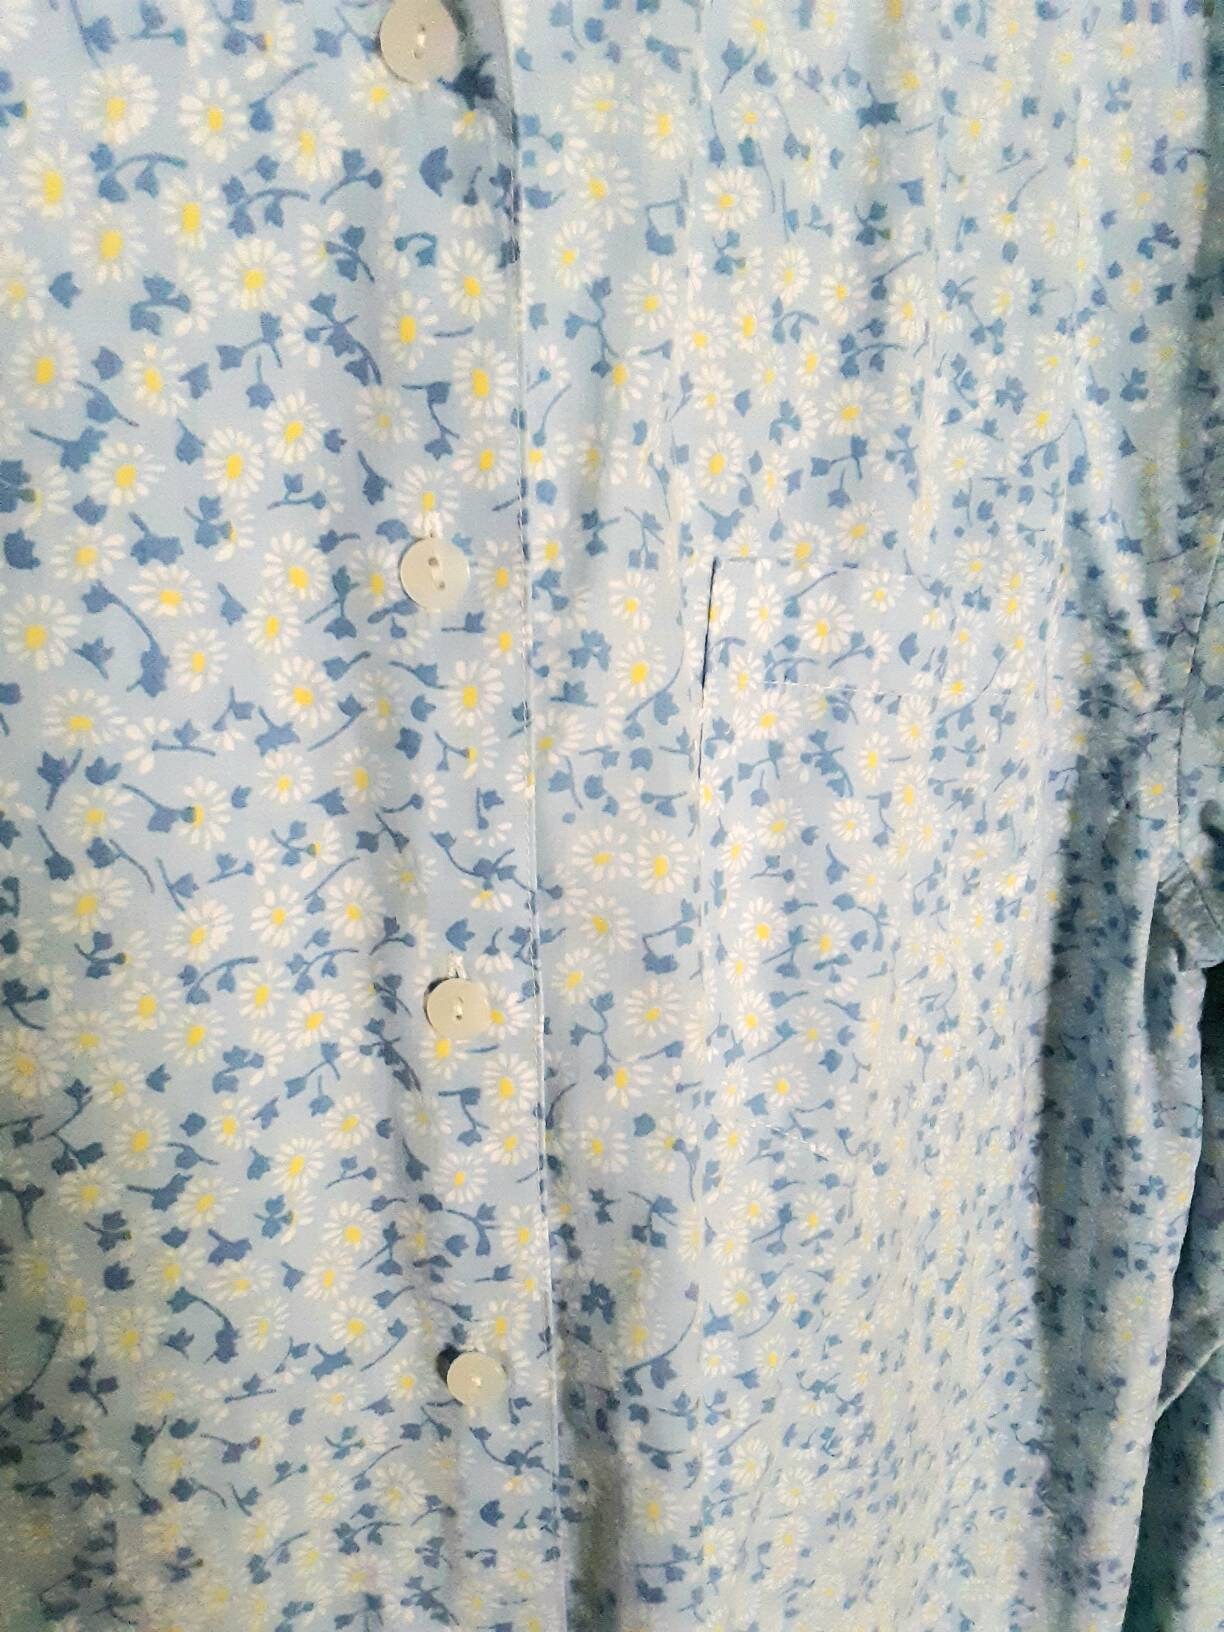 1990s Vintage Daisy Floral Grunge Flower Power Basic Editions - Etsy